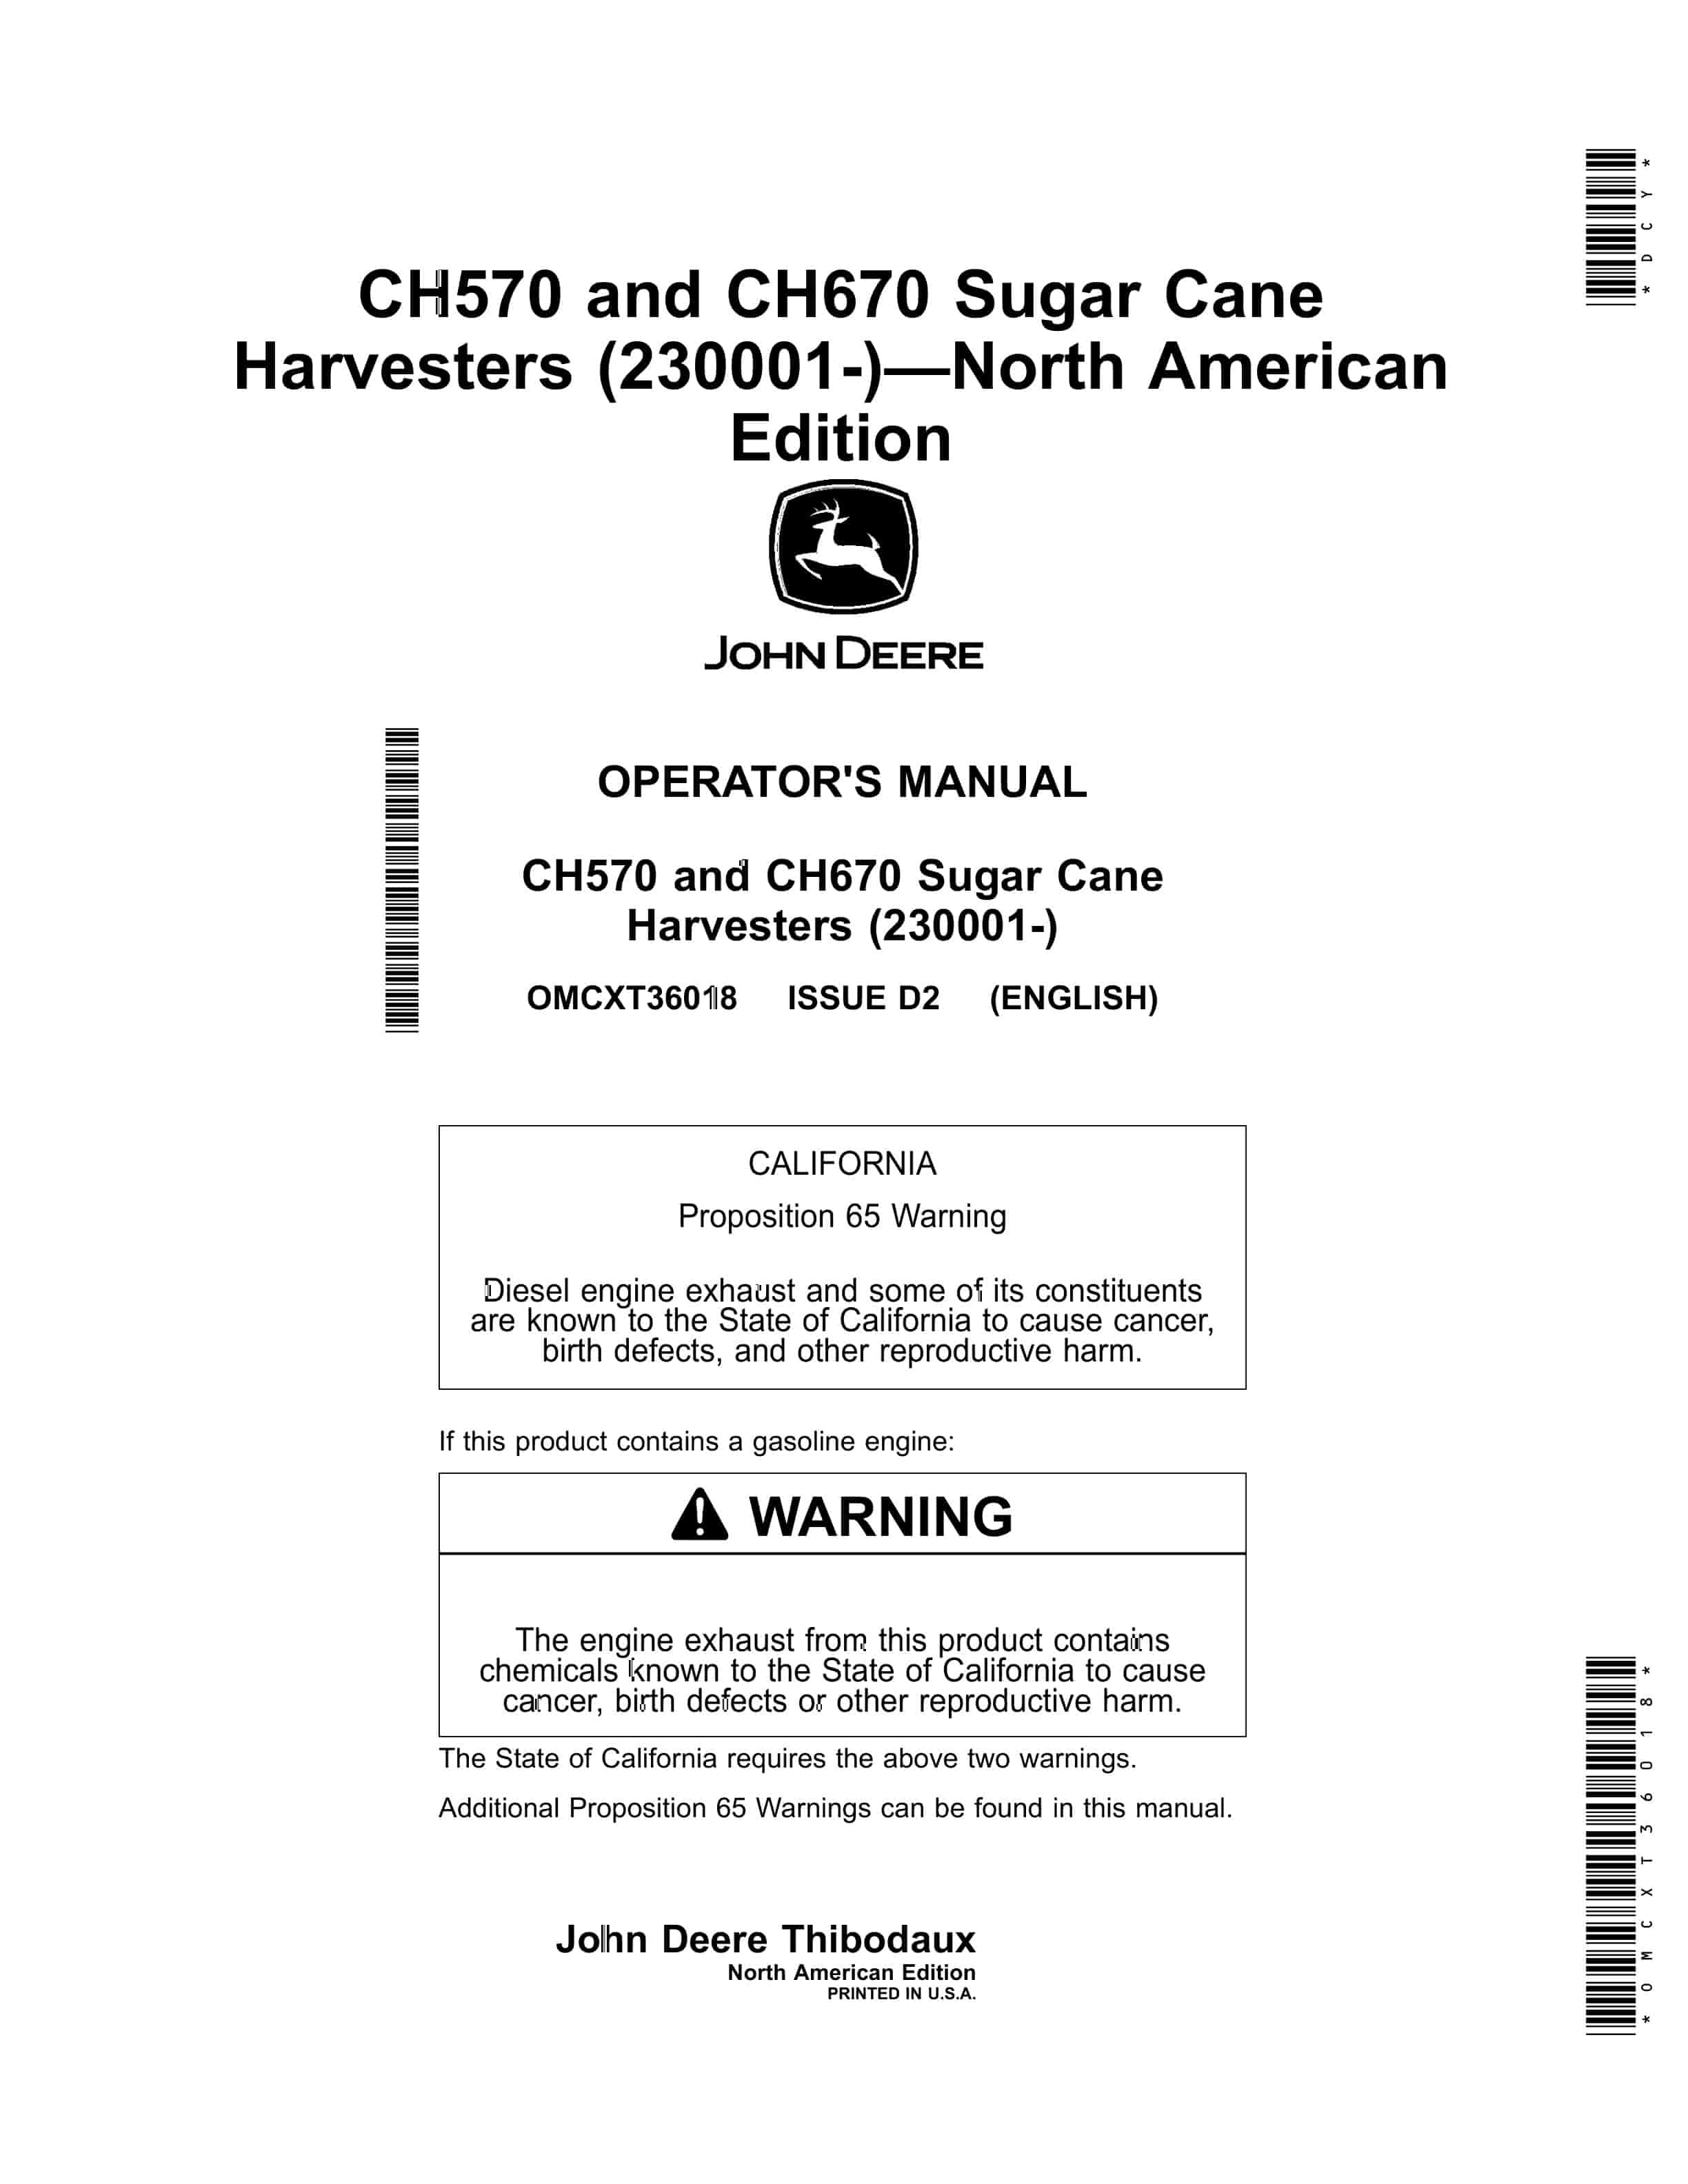 John Deere CH570 and CH670 Sugar Cane Harvesters Operator Manual OMCXT36018 1